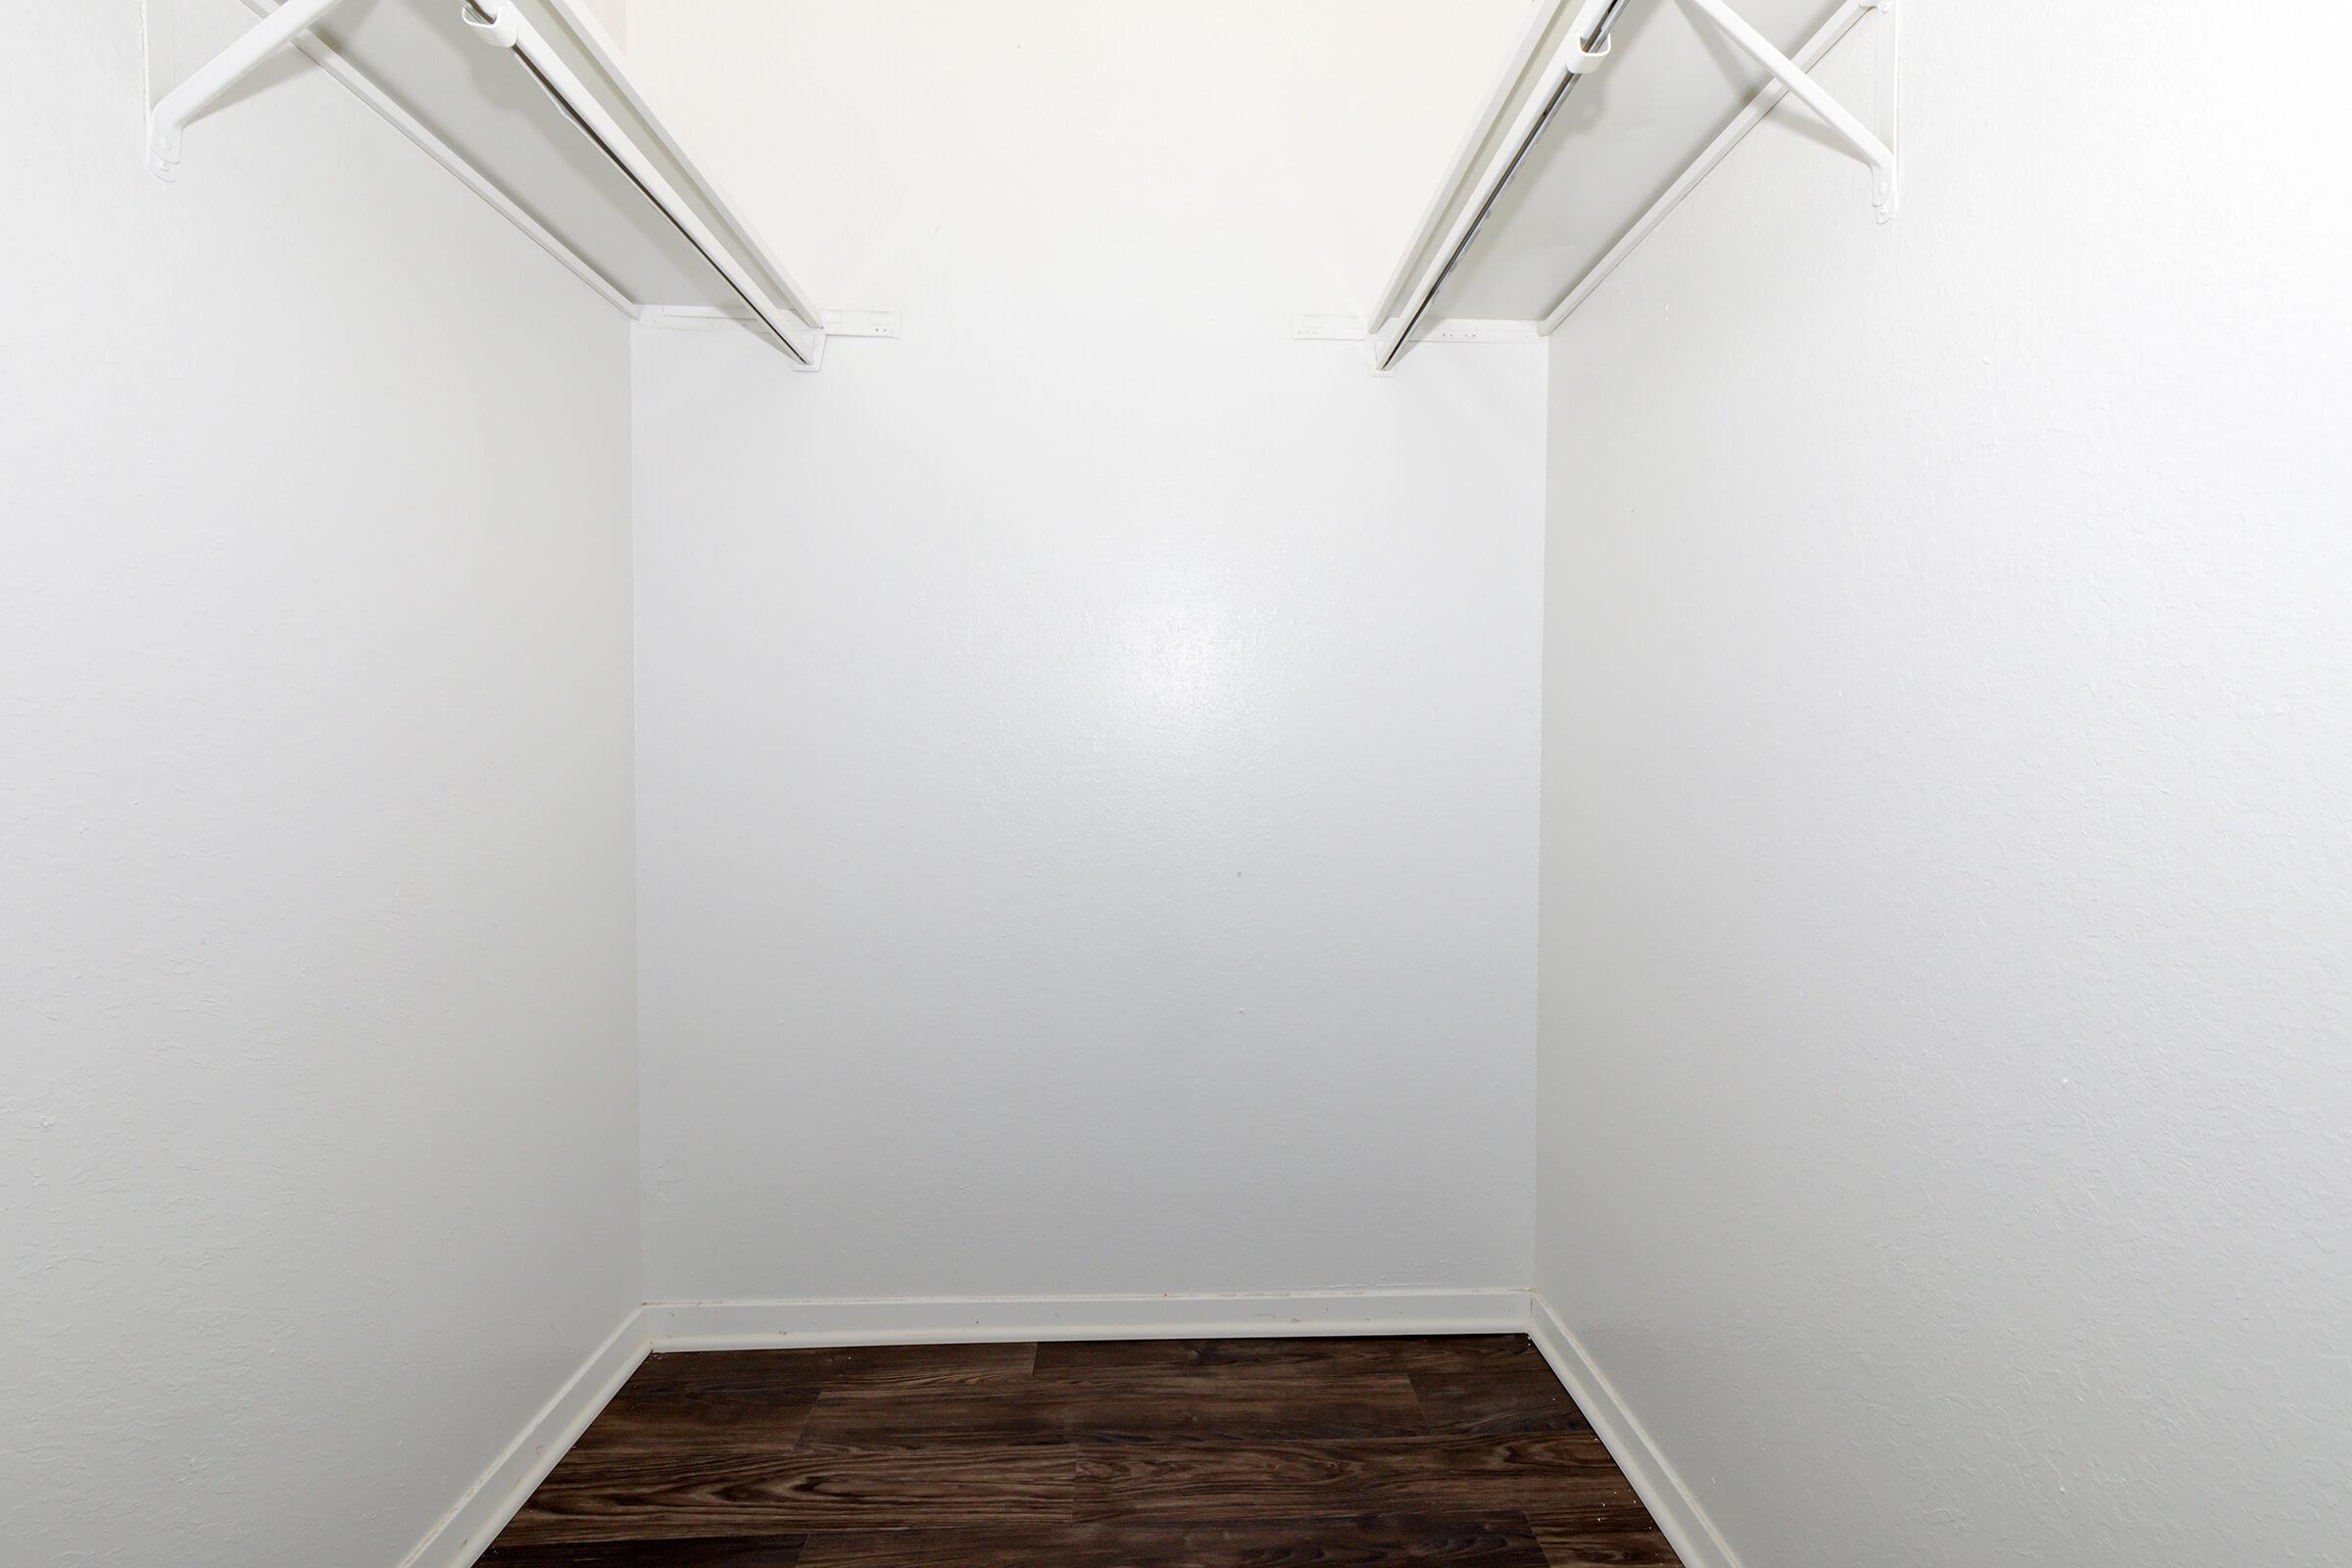 walk-in closet with wooden floors